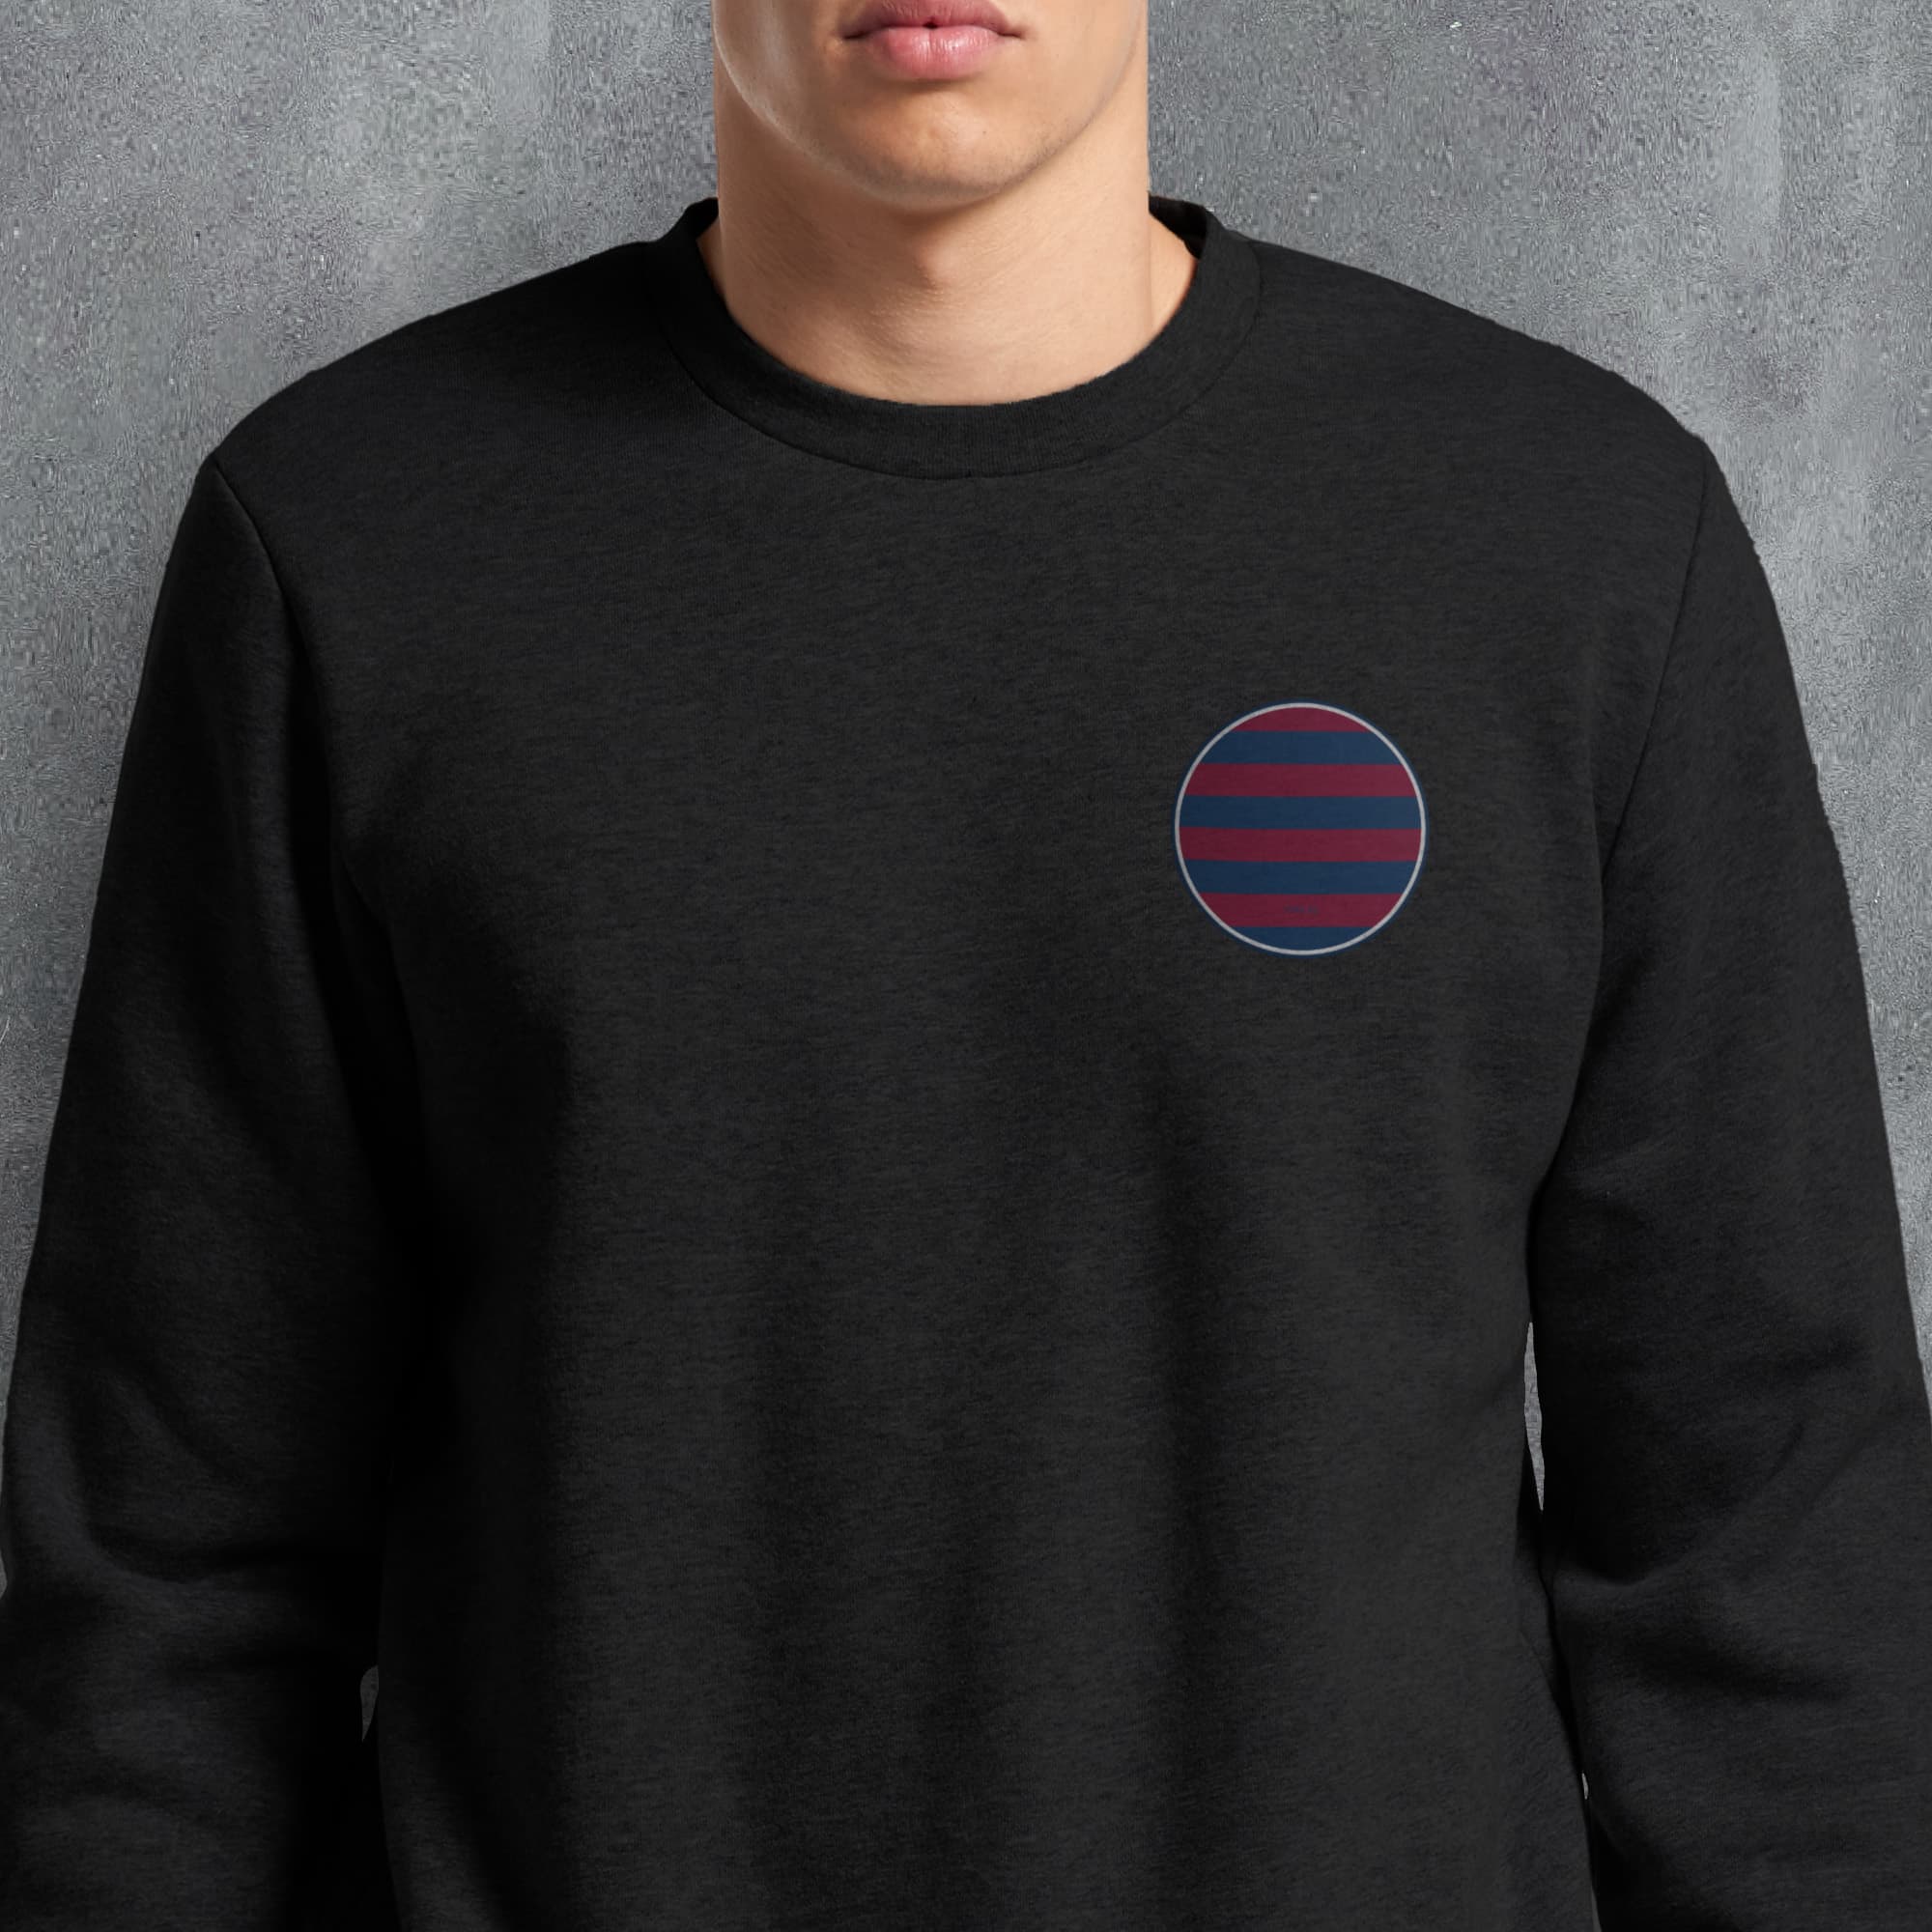 a man wearing a black sweatshirt with a red and blue circle on it